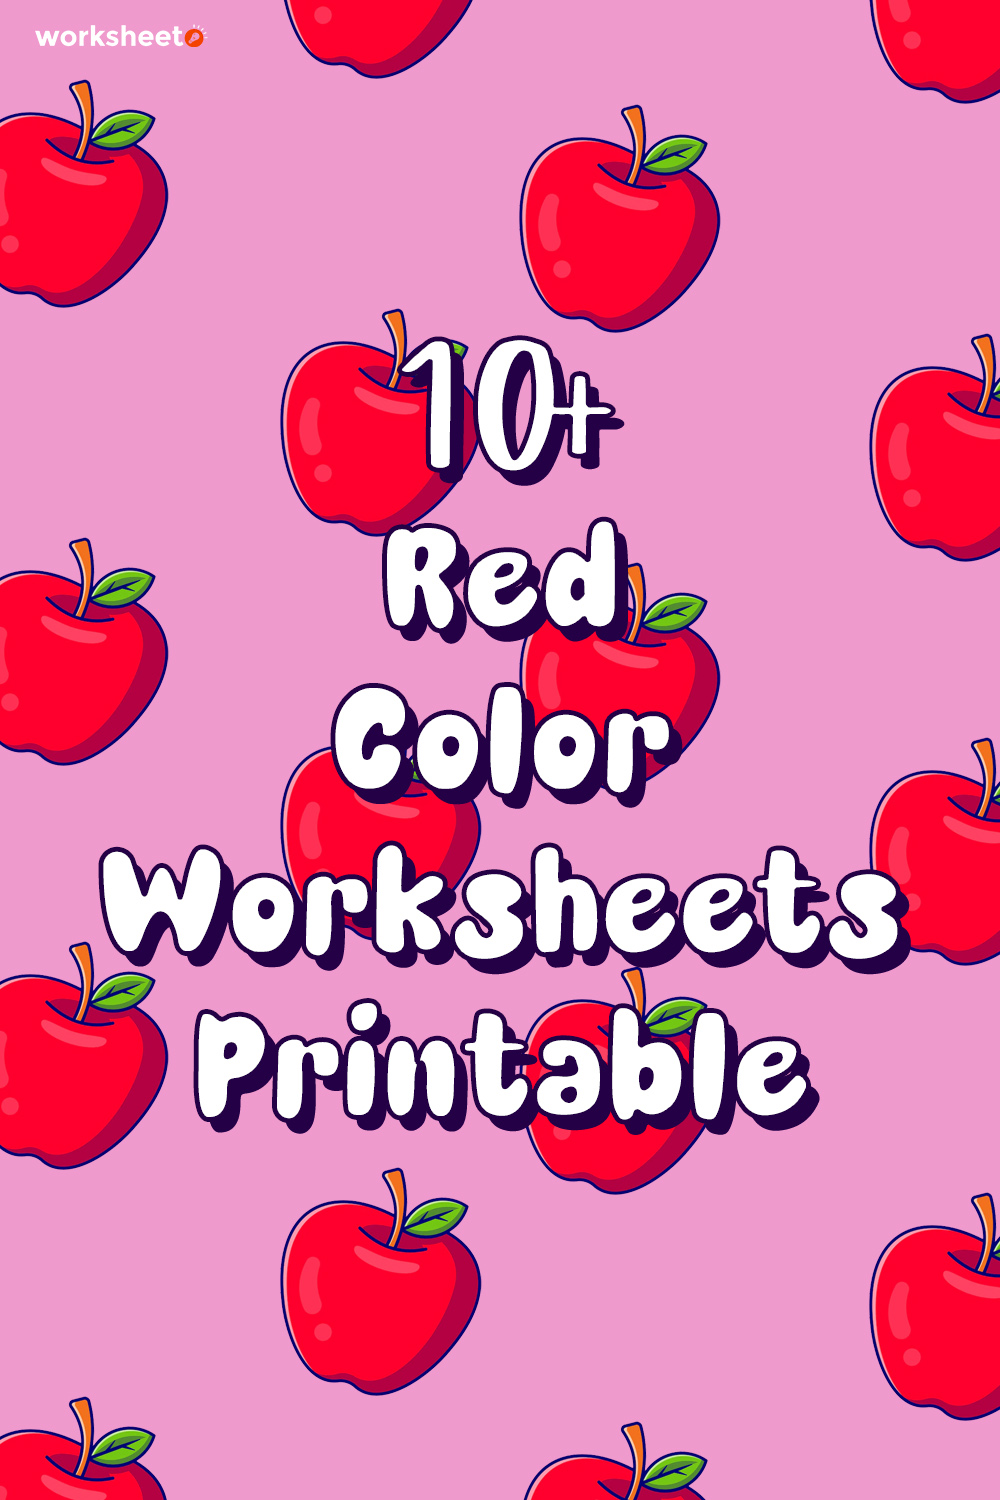 11 Images of Red Color Worksheets Printable